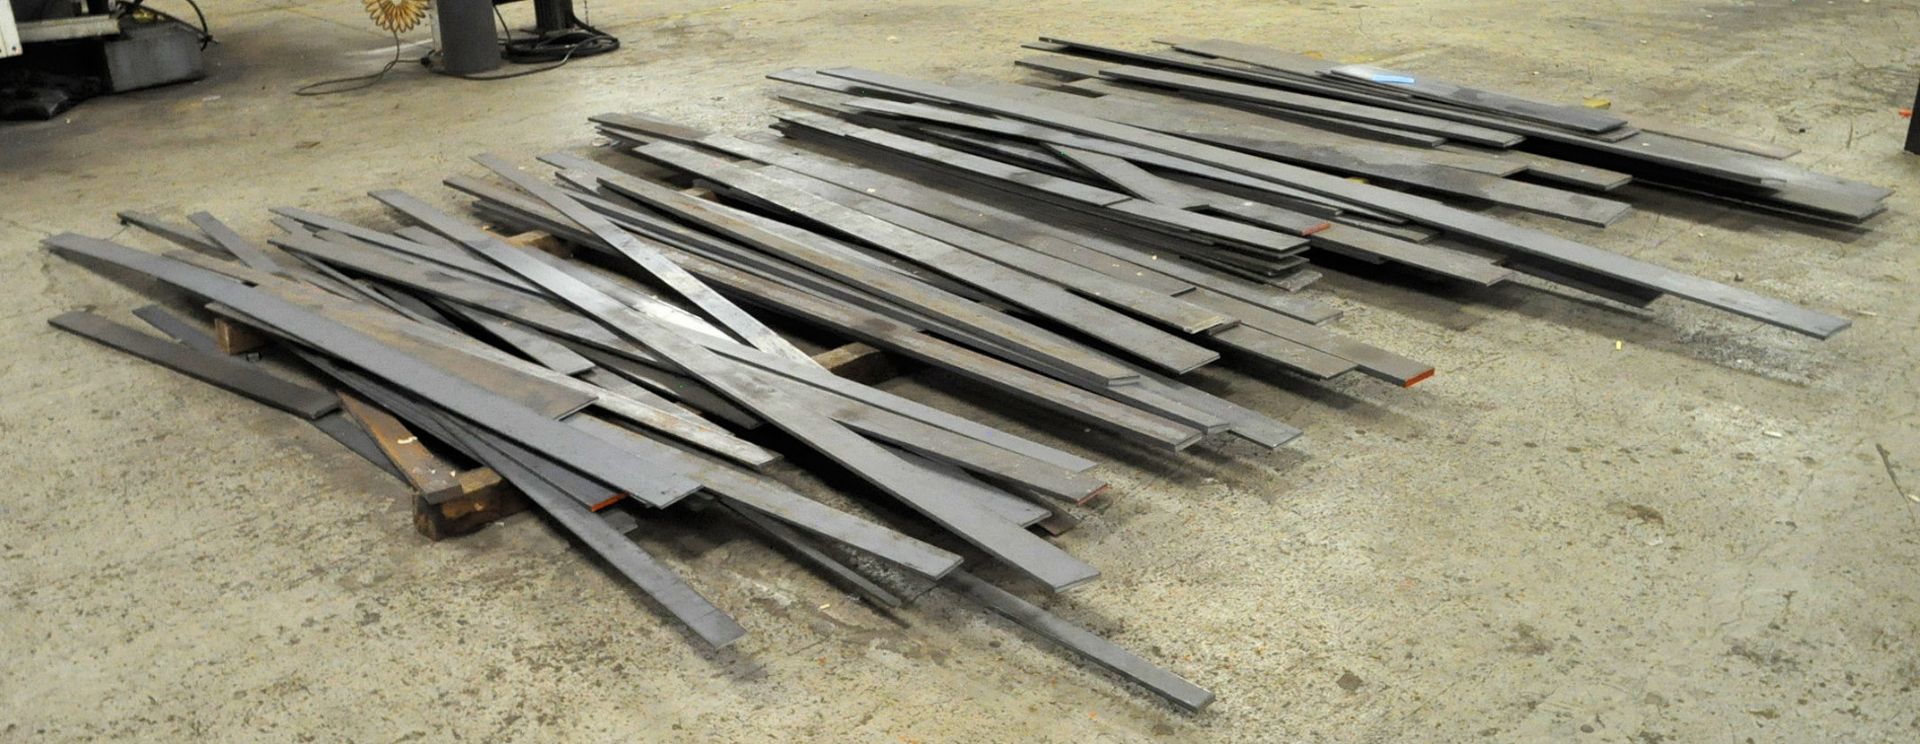 Lot-Flat Bar Steel Stock on Floor in (1) Group, Various Lengths and Widths - Image 2 of 2